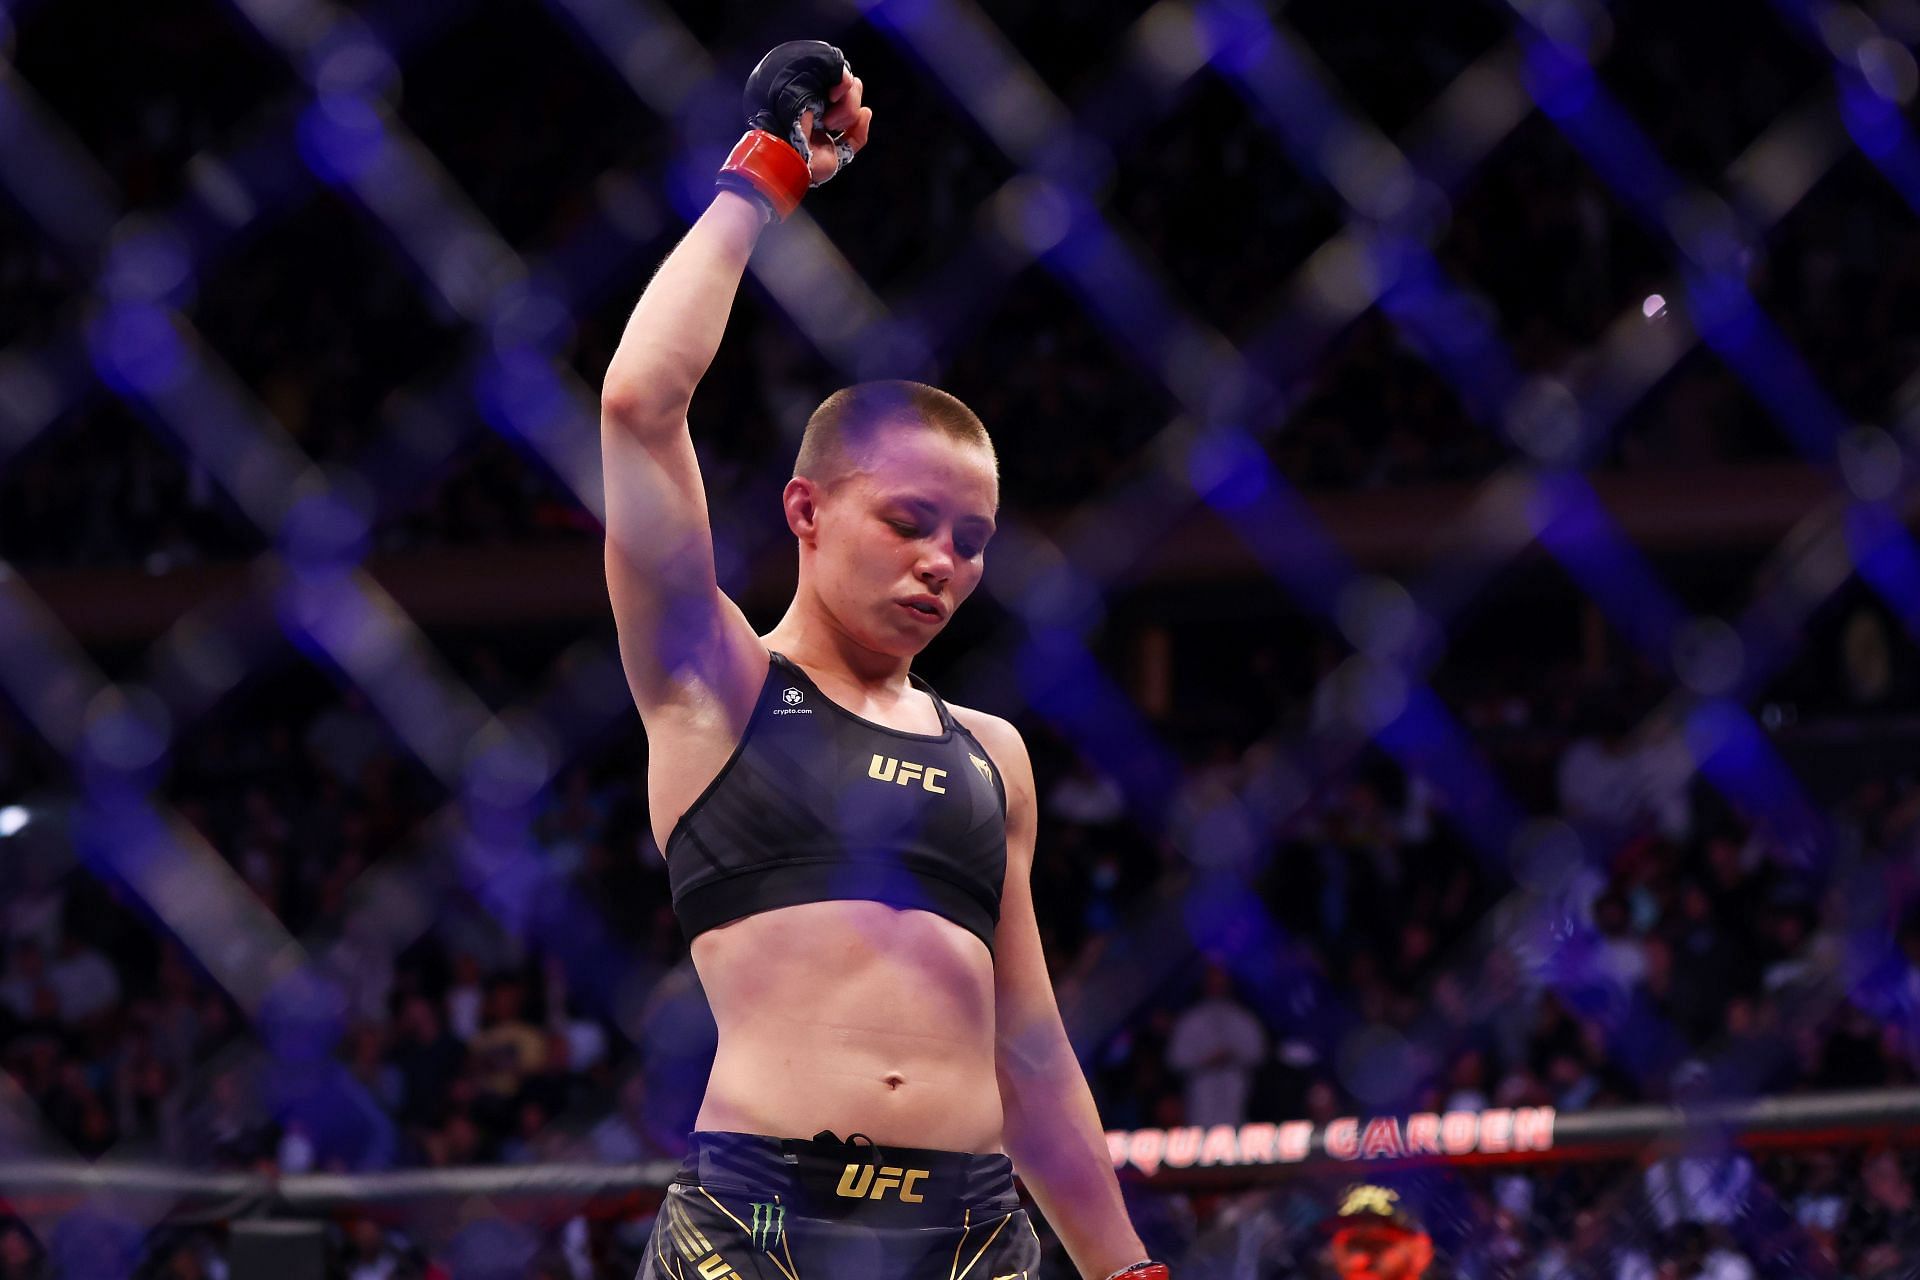 UFC 268: Rose Namajunas emerged victorious in a rematch against Zhang Weili